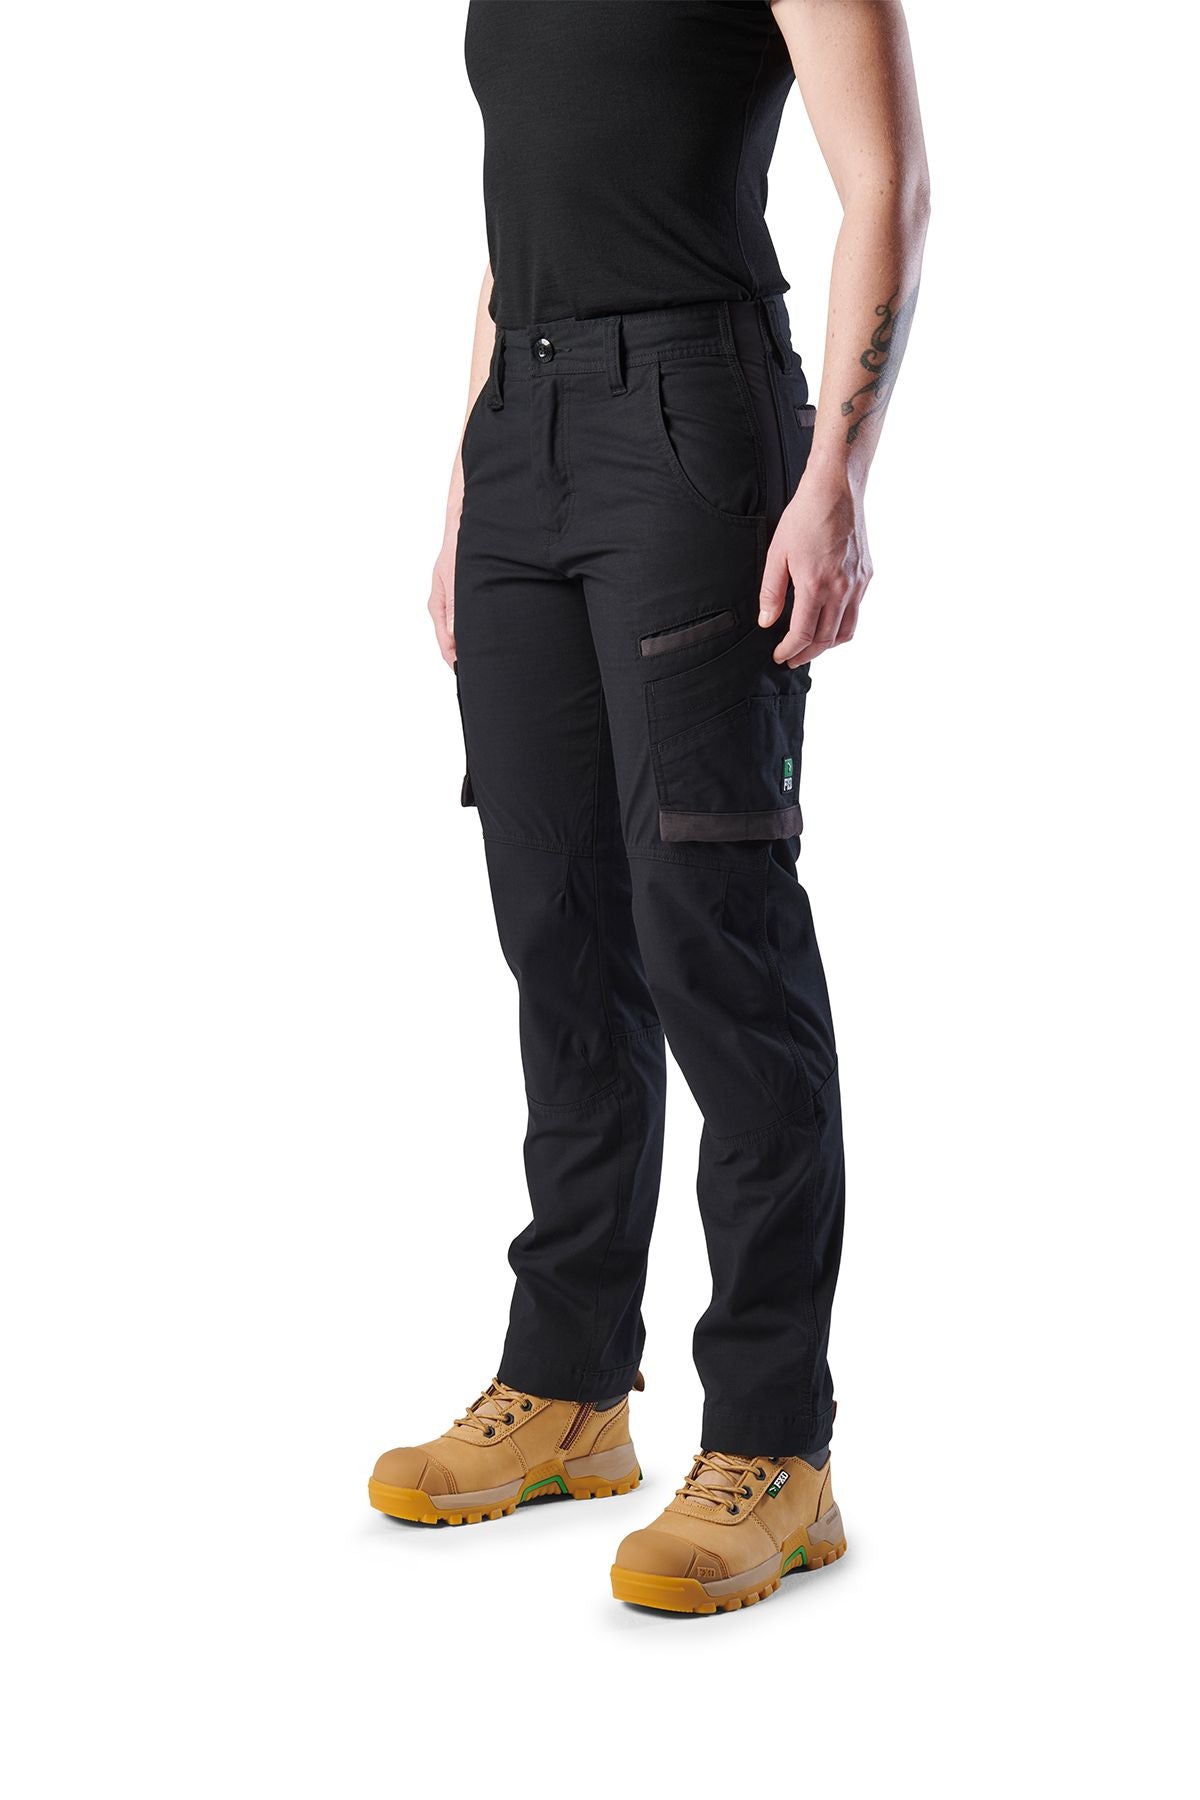 FXD WP7W Womens Lightweight Ripstop Work Pant